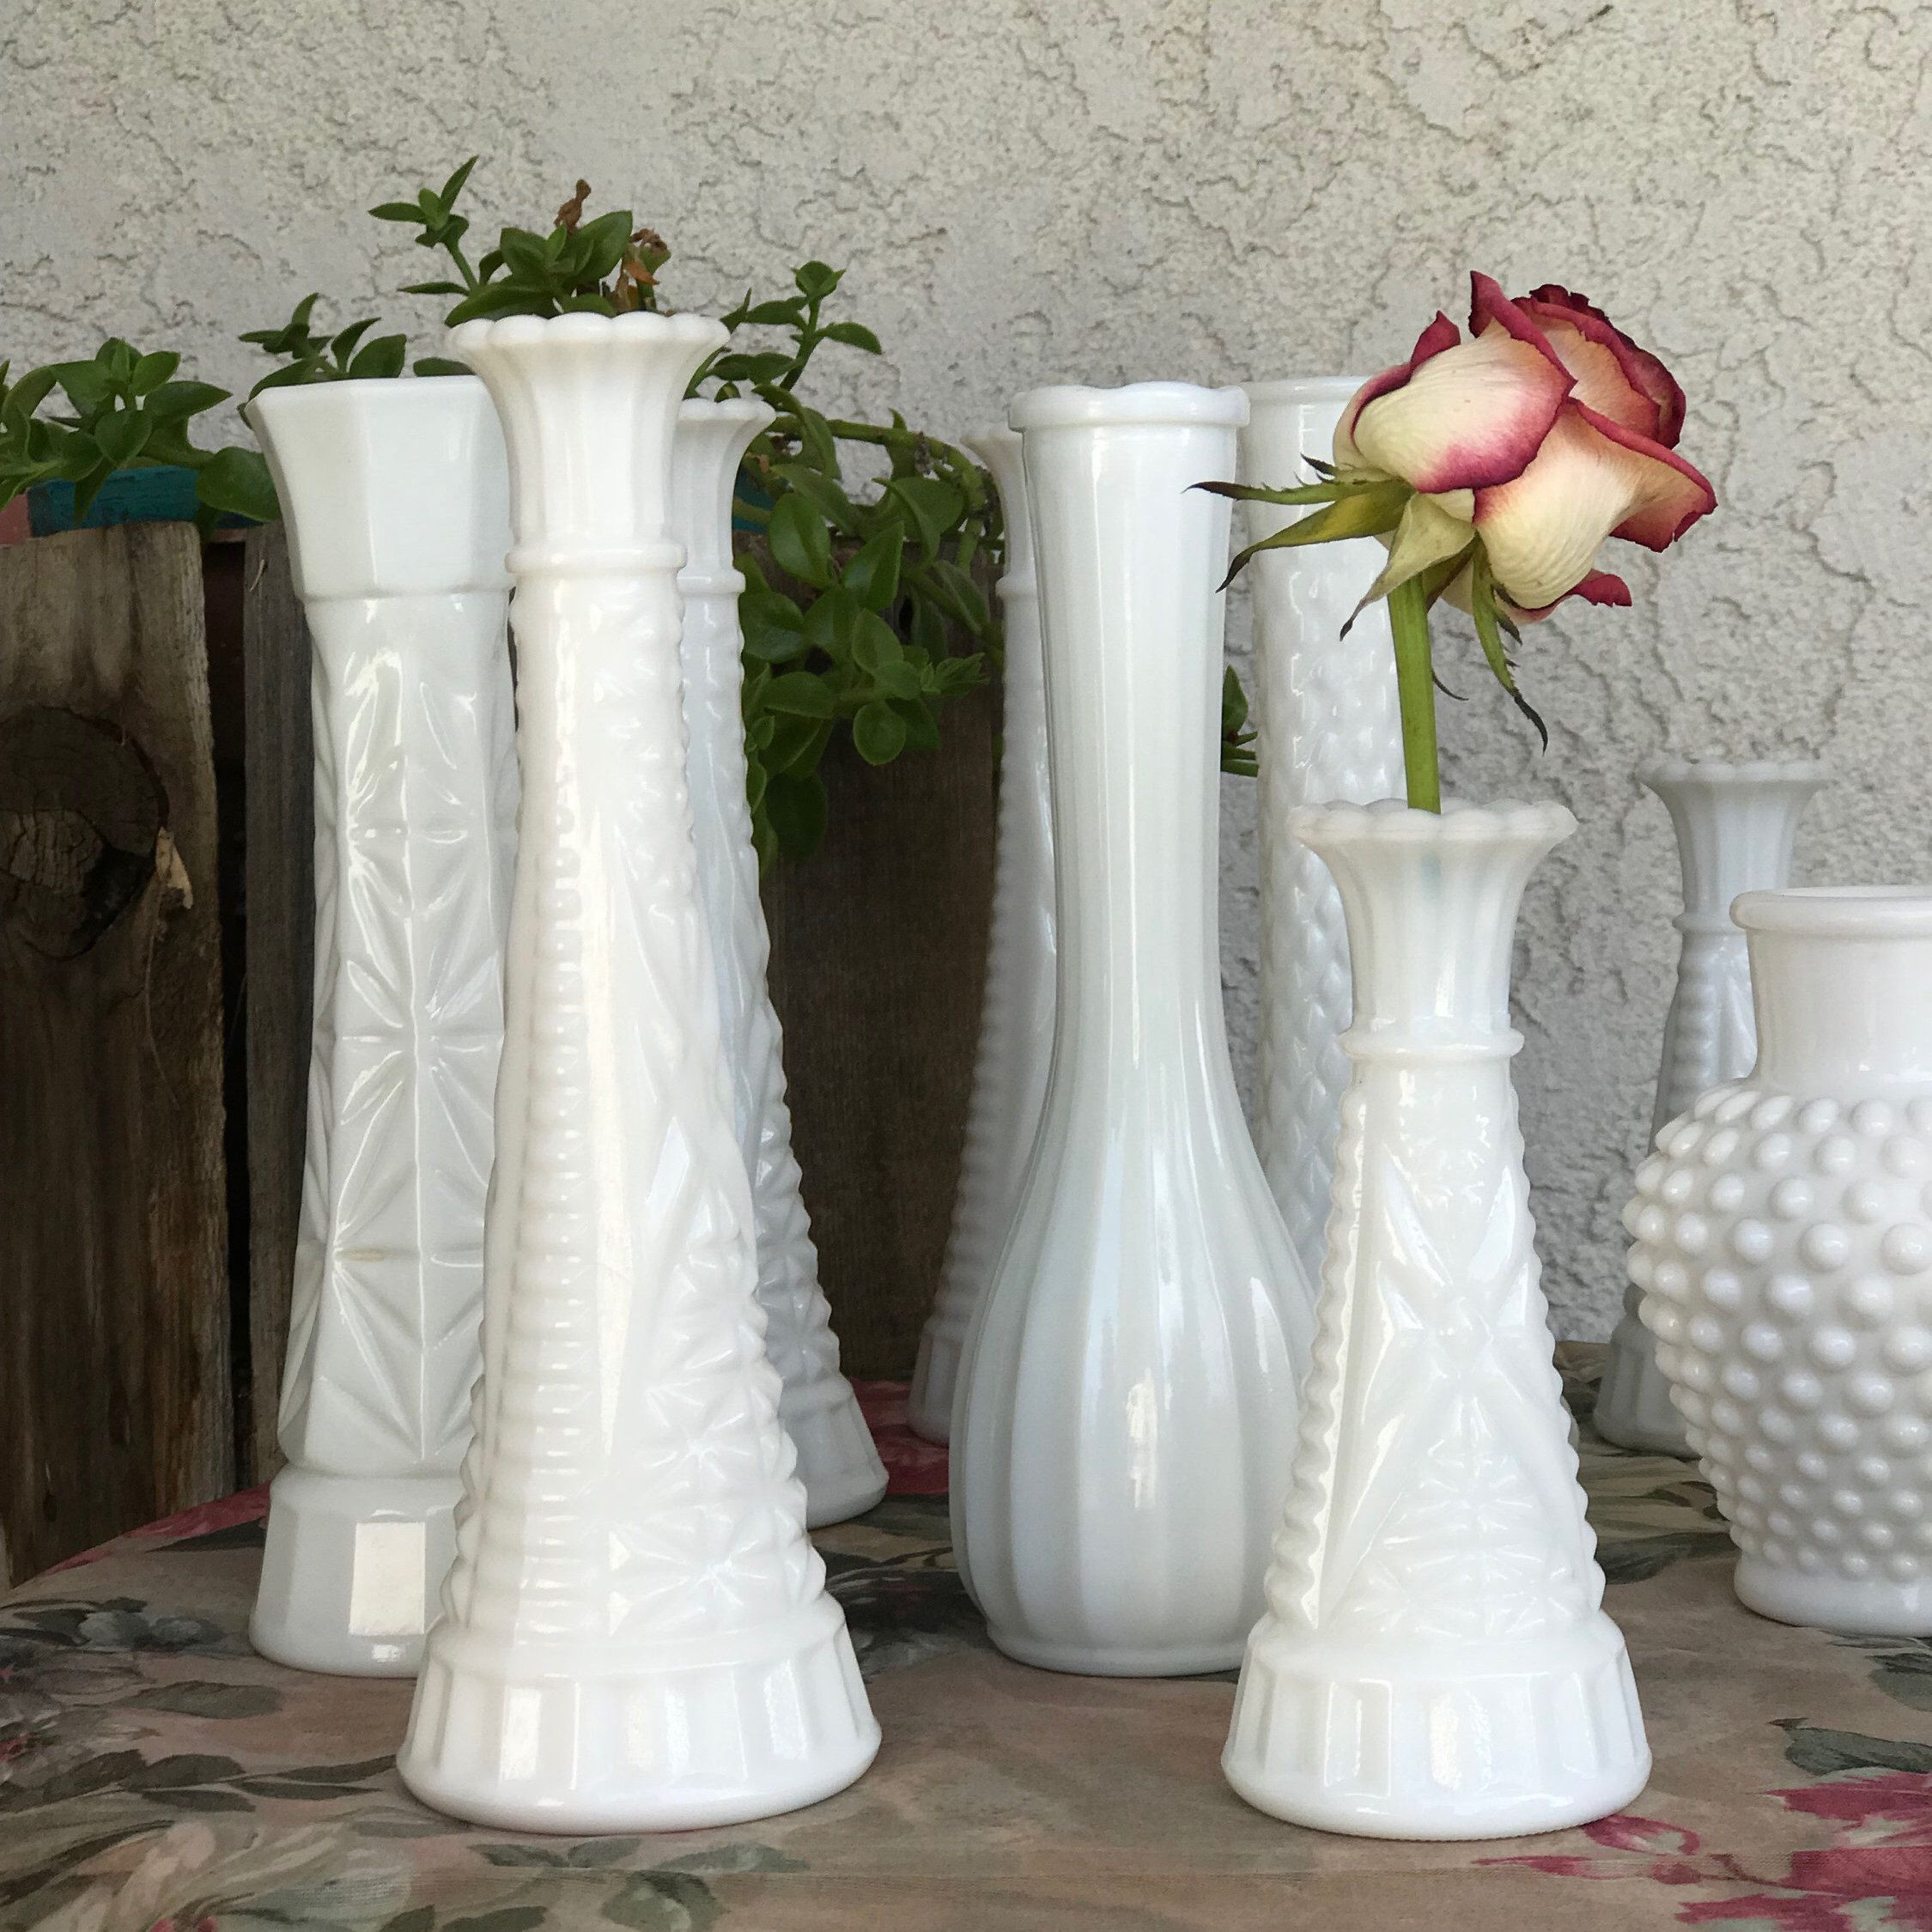 21 Recommended White Milk Vase 2024 free download white milk vase of excited to share the latest addition to my etsy shop vintage milk regarding excited to share the latest addition to my etsy shop vintage milk white vases